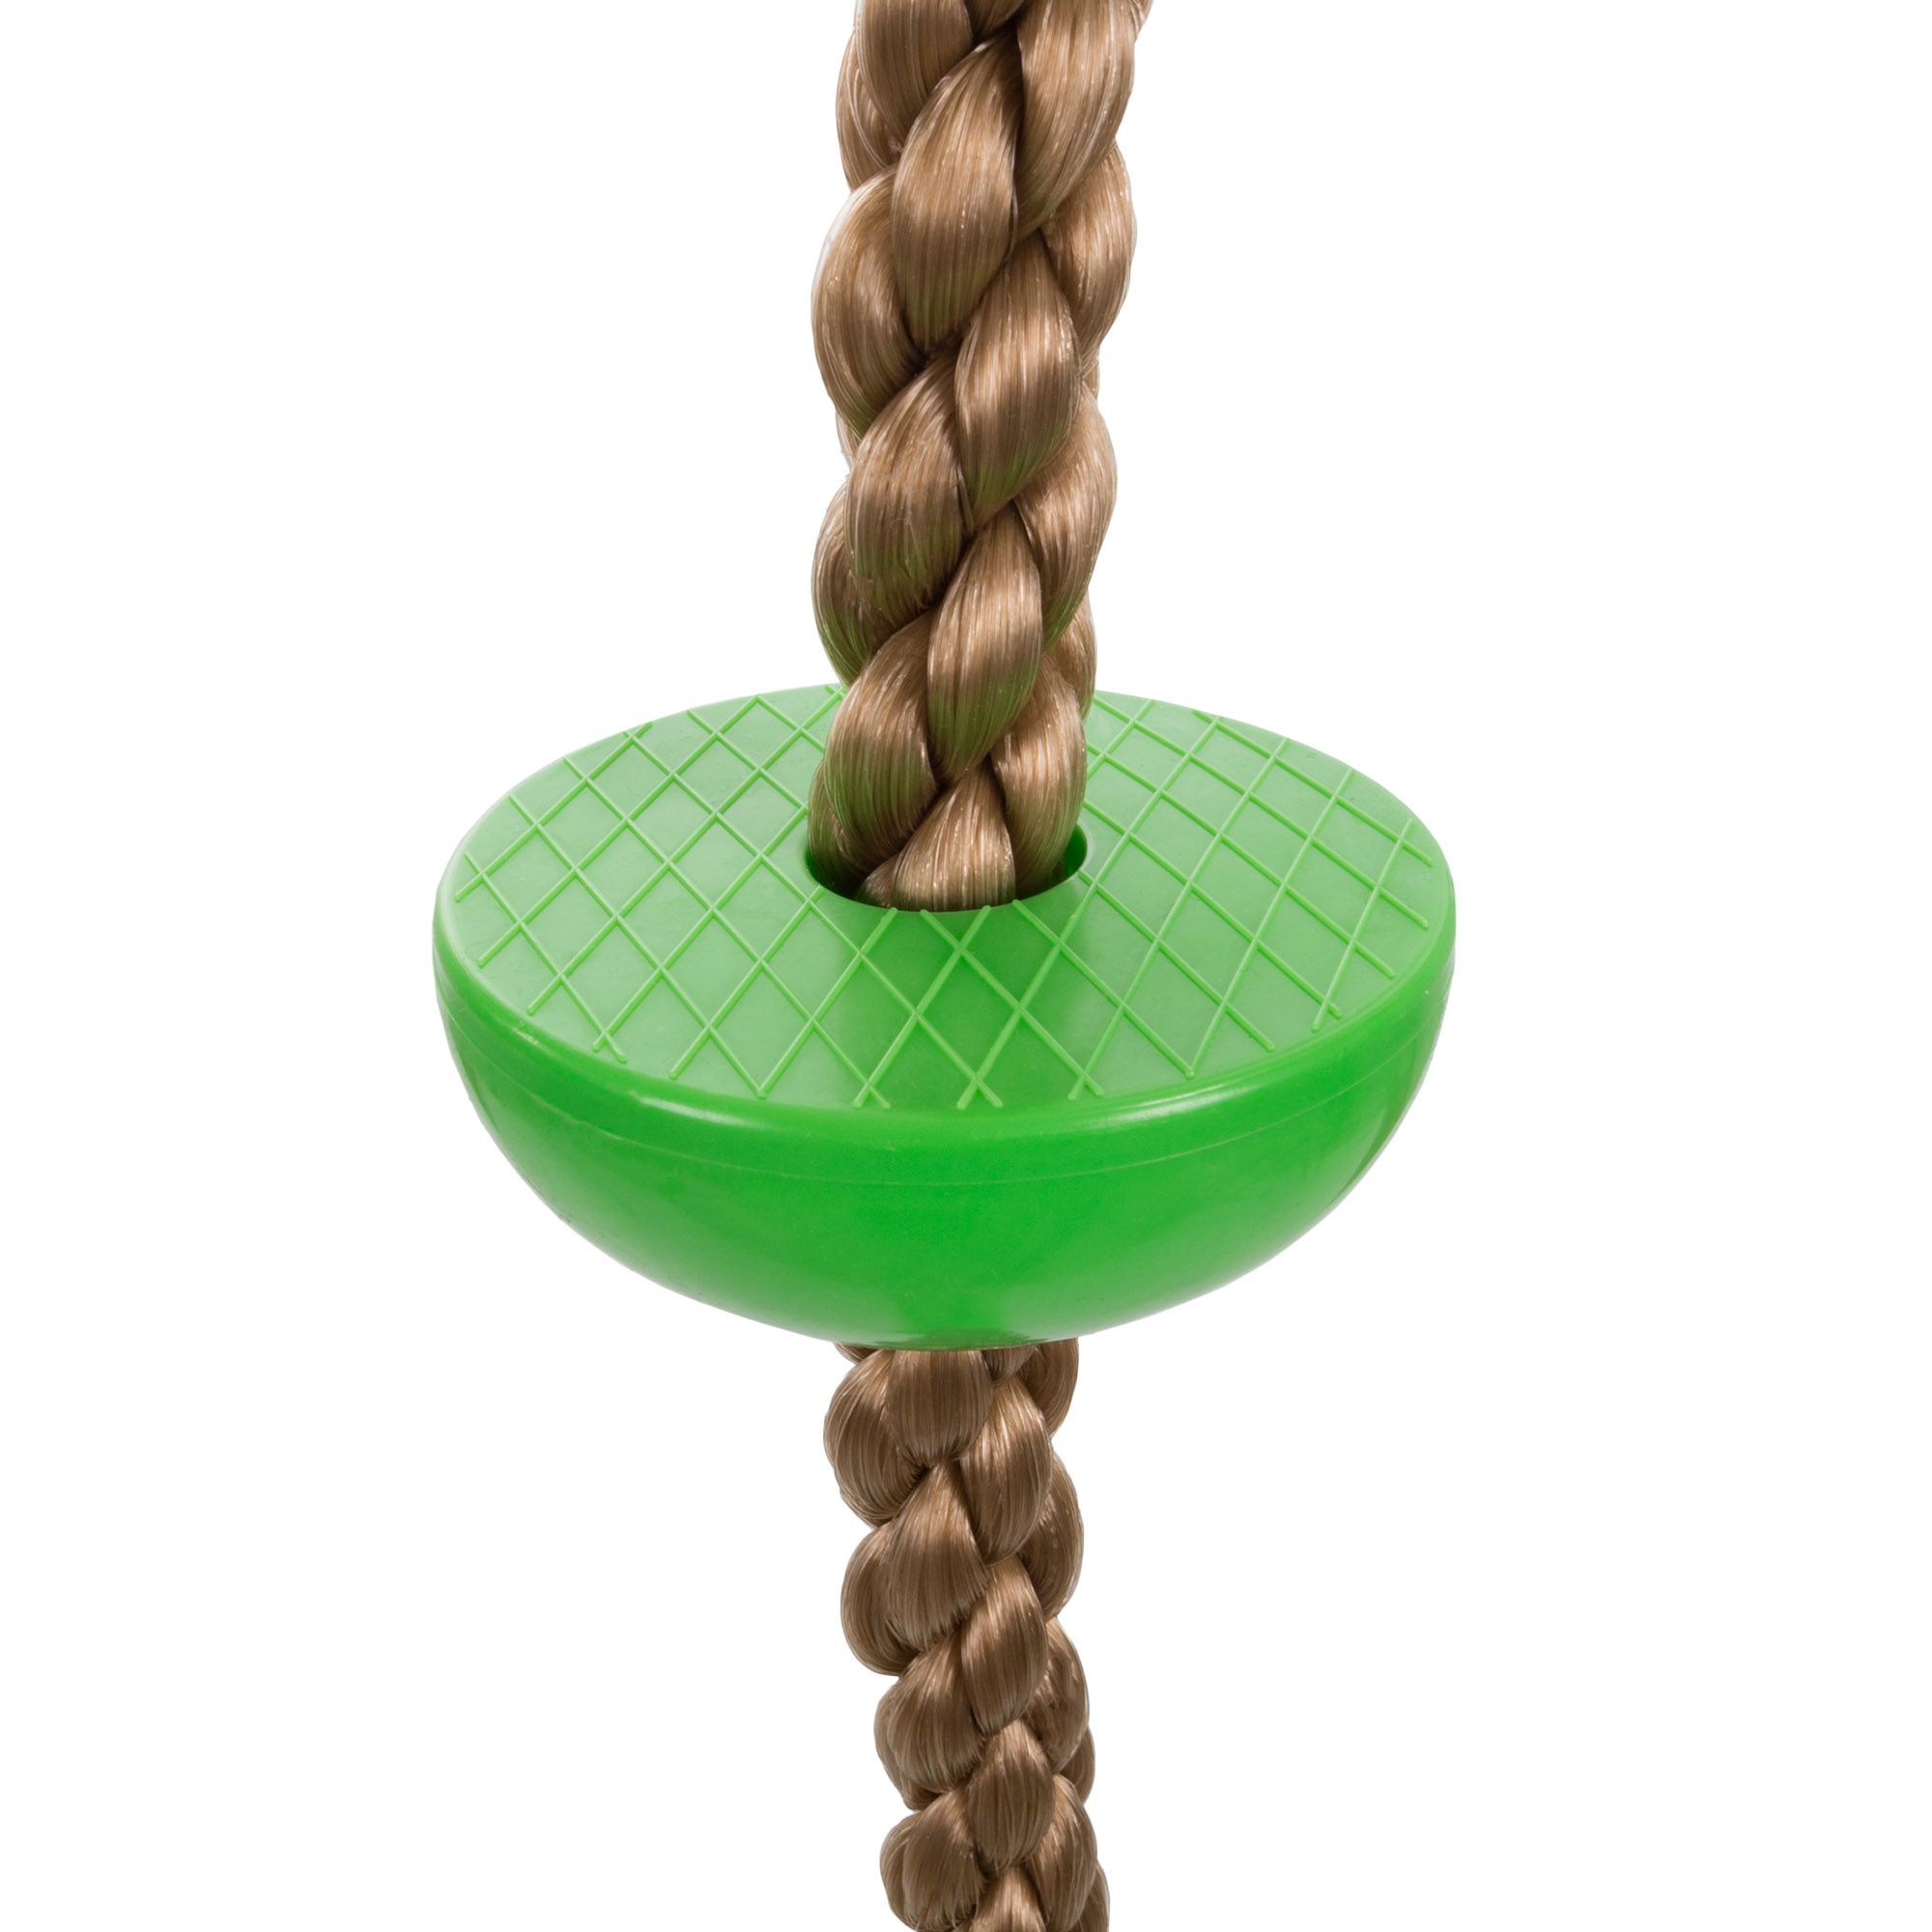 Tree Ladder Knotted 80 Inch Rope With 5 Climbing Discs Kids Toddlers Outdoors Addition To Gym Or Playset